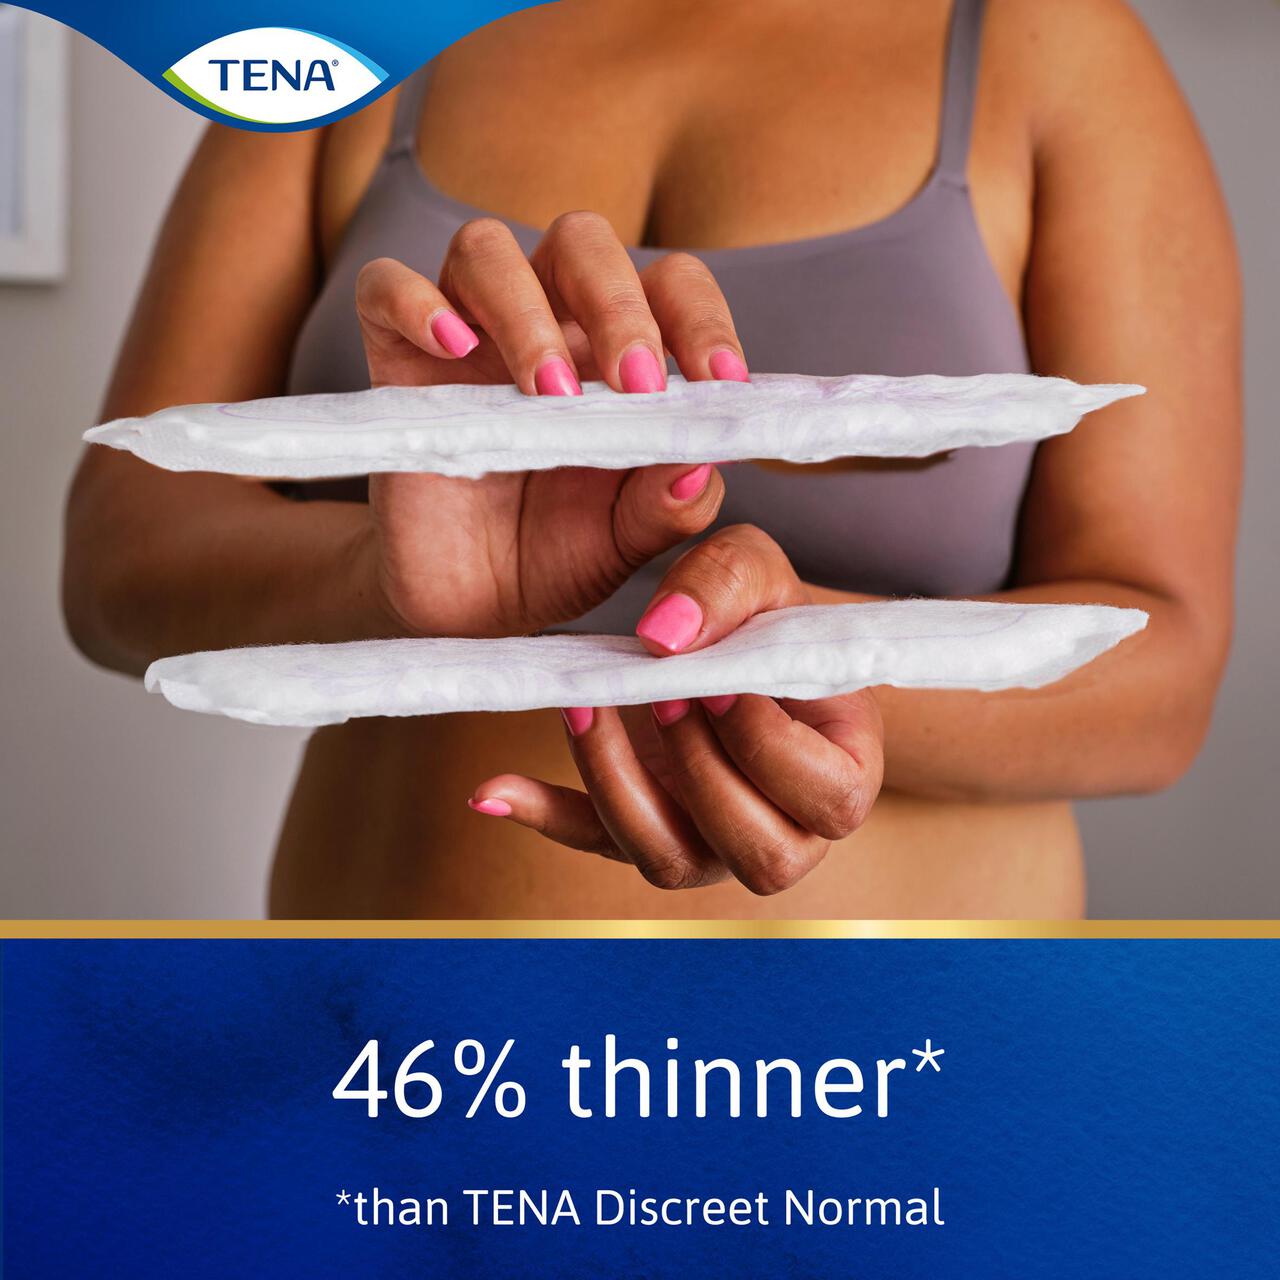 TENA Lady Discreet Incontinence Pads 16 per pack